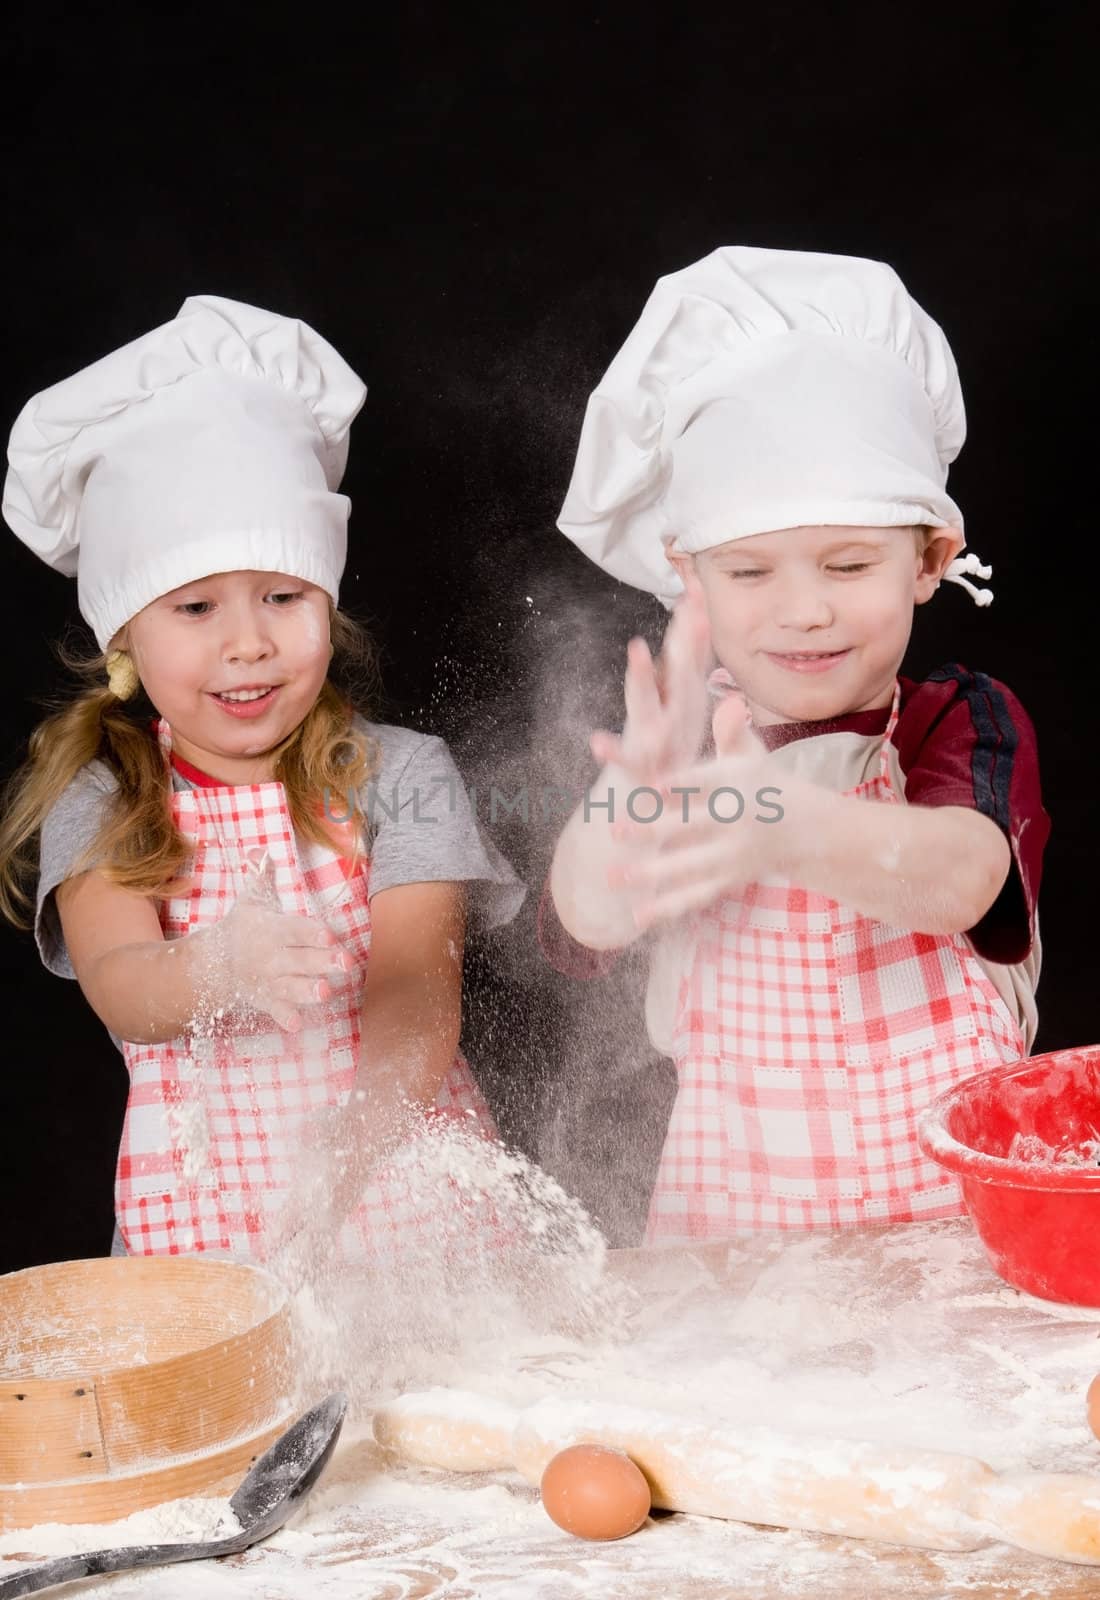 Two children plays with the flour on dark background